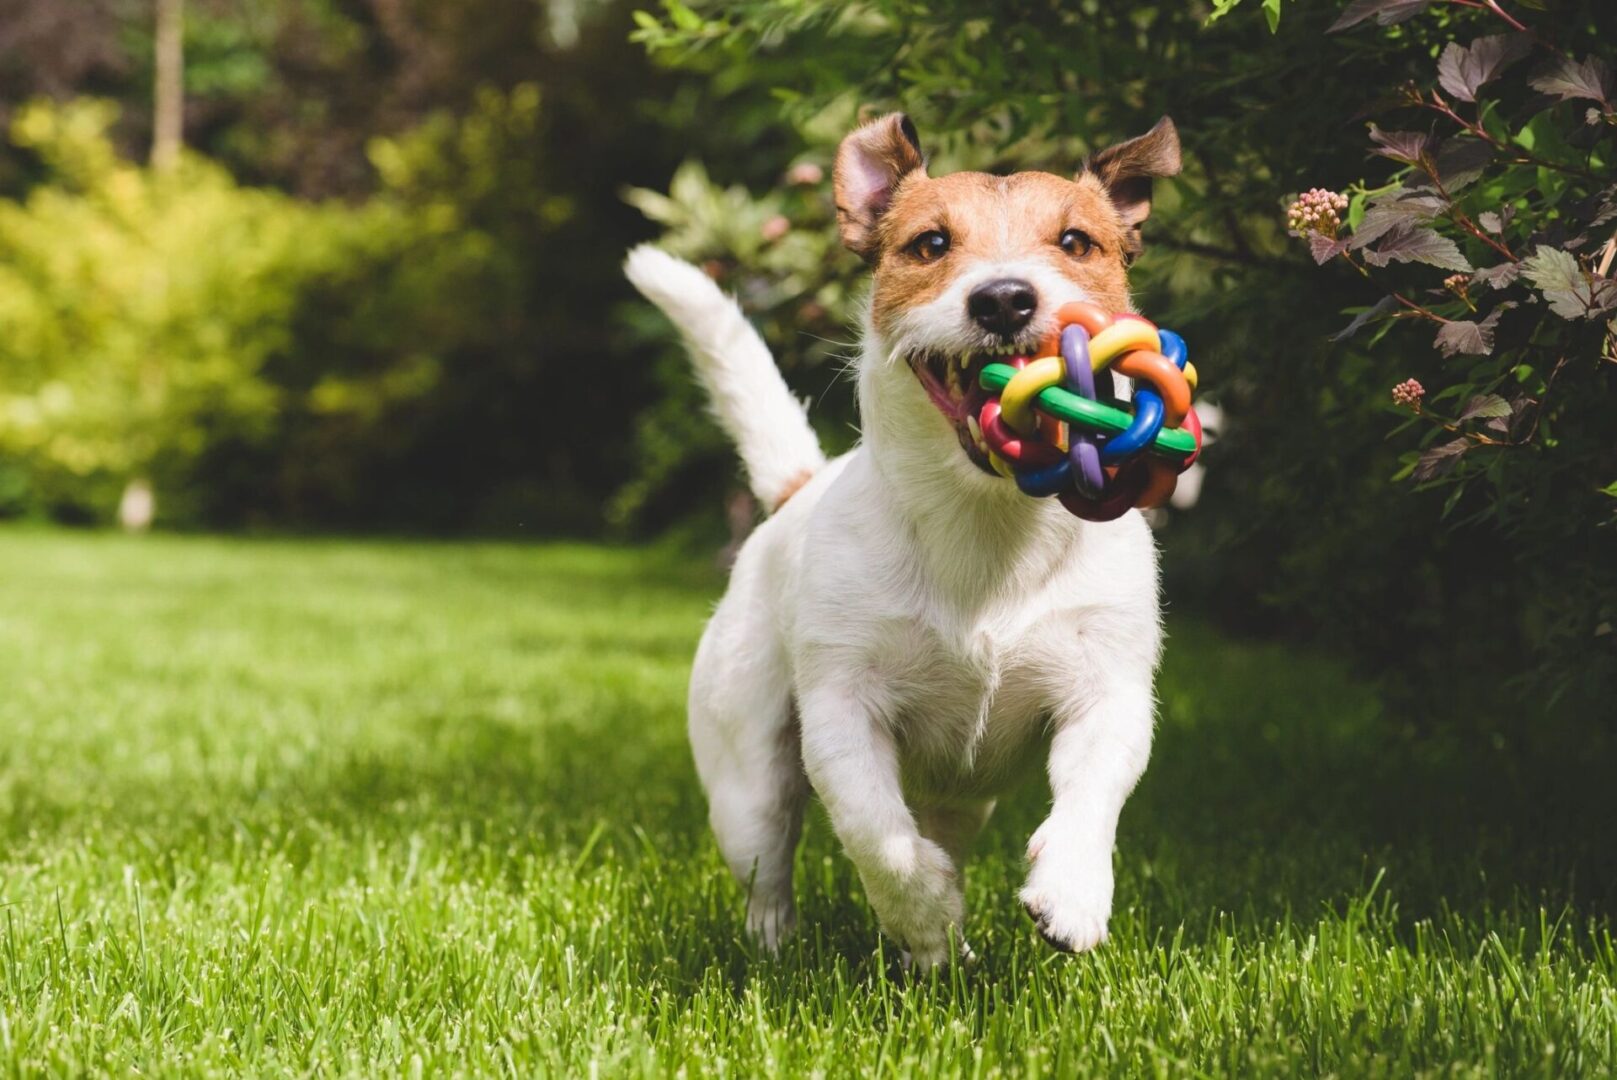 A dog holding a ball in its mouth and running